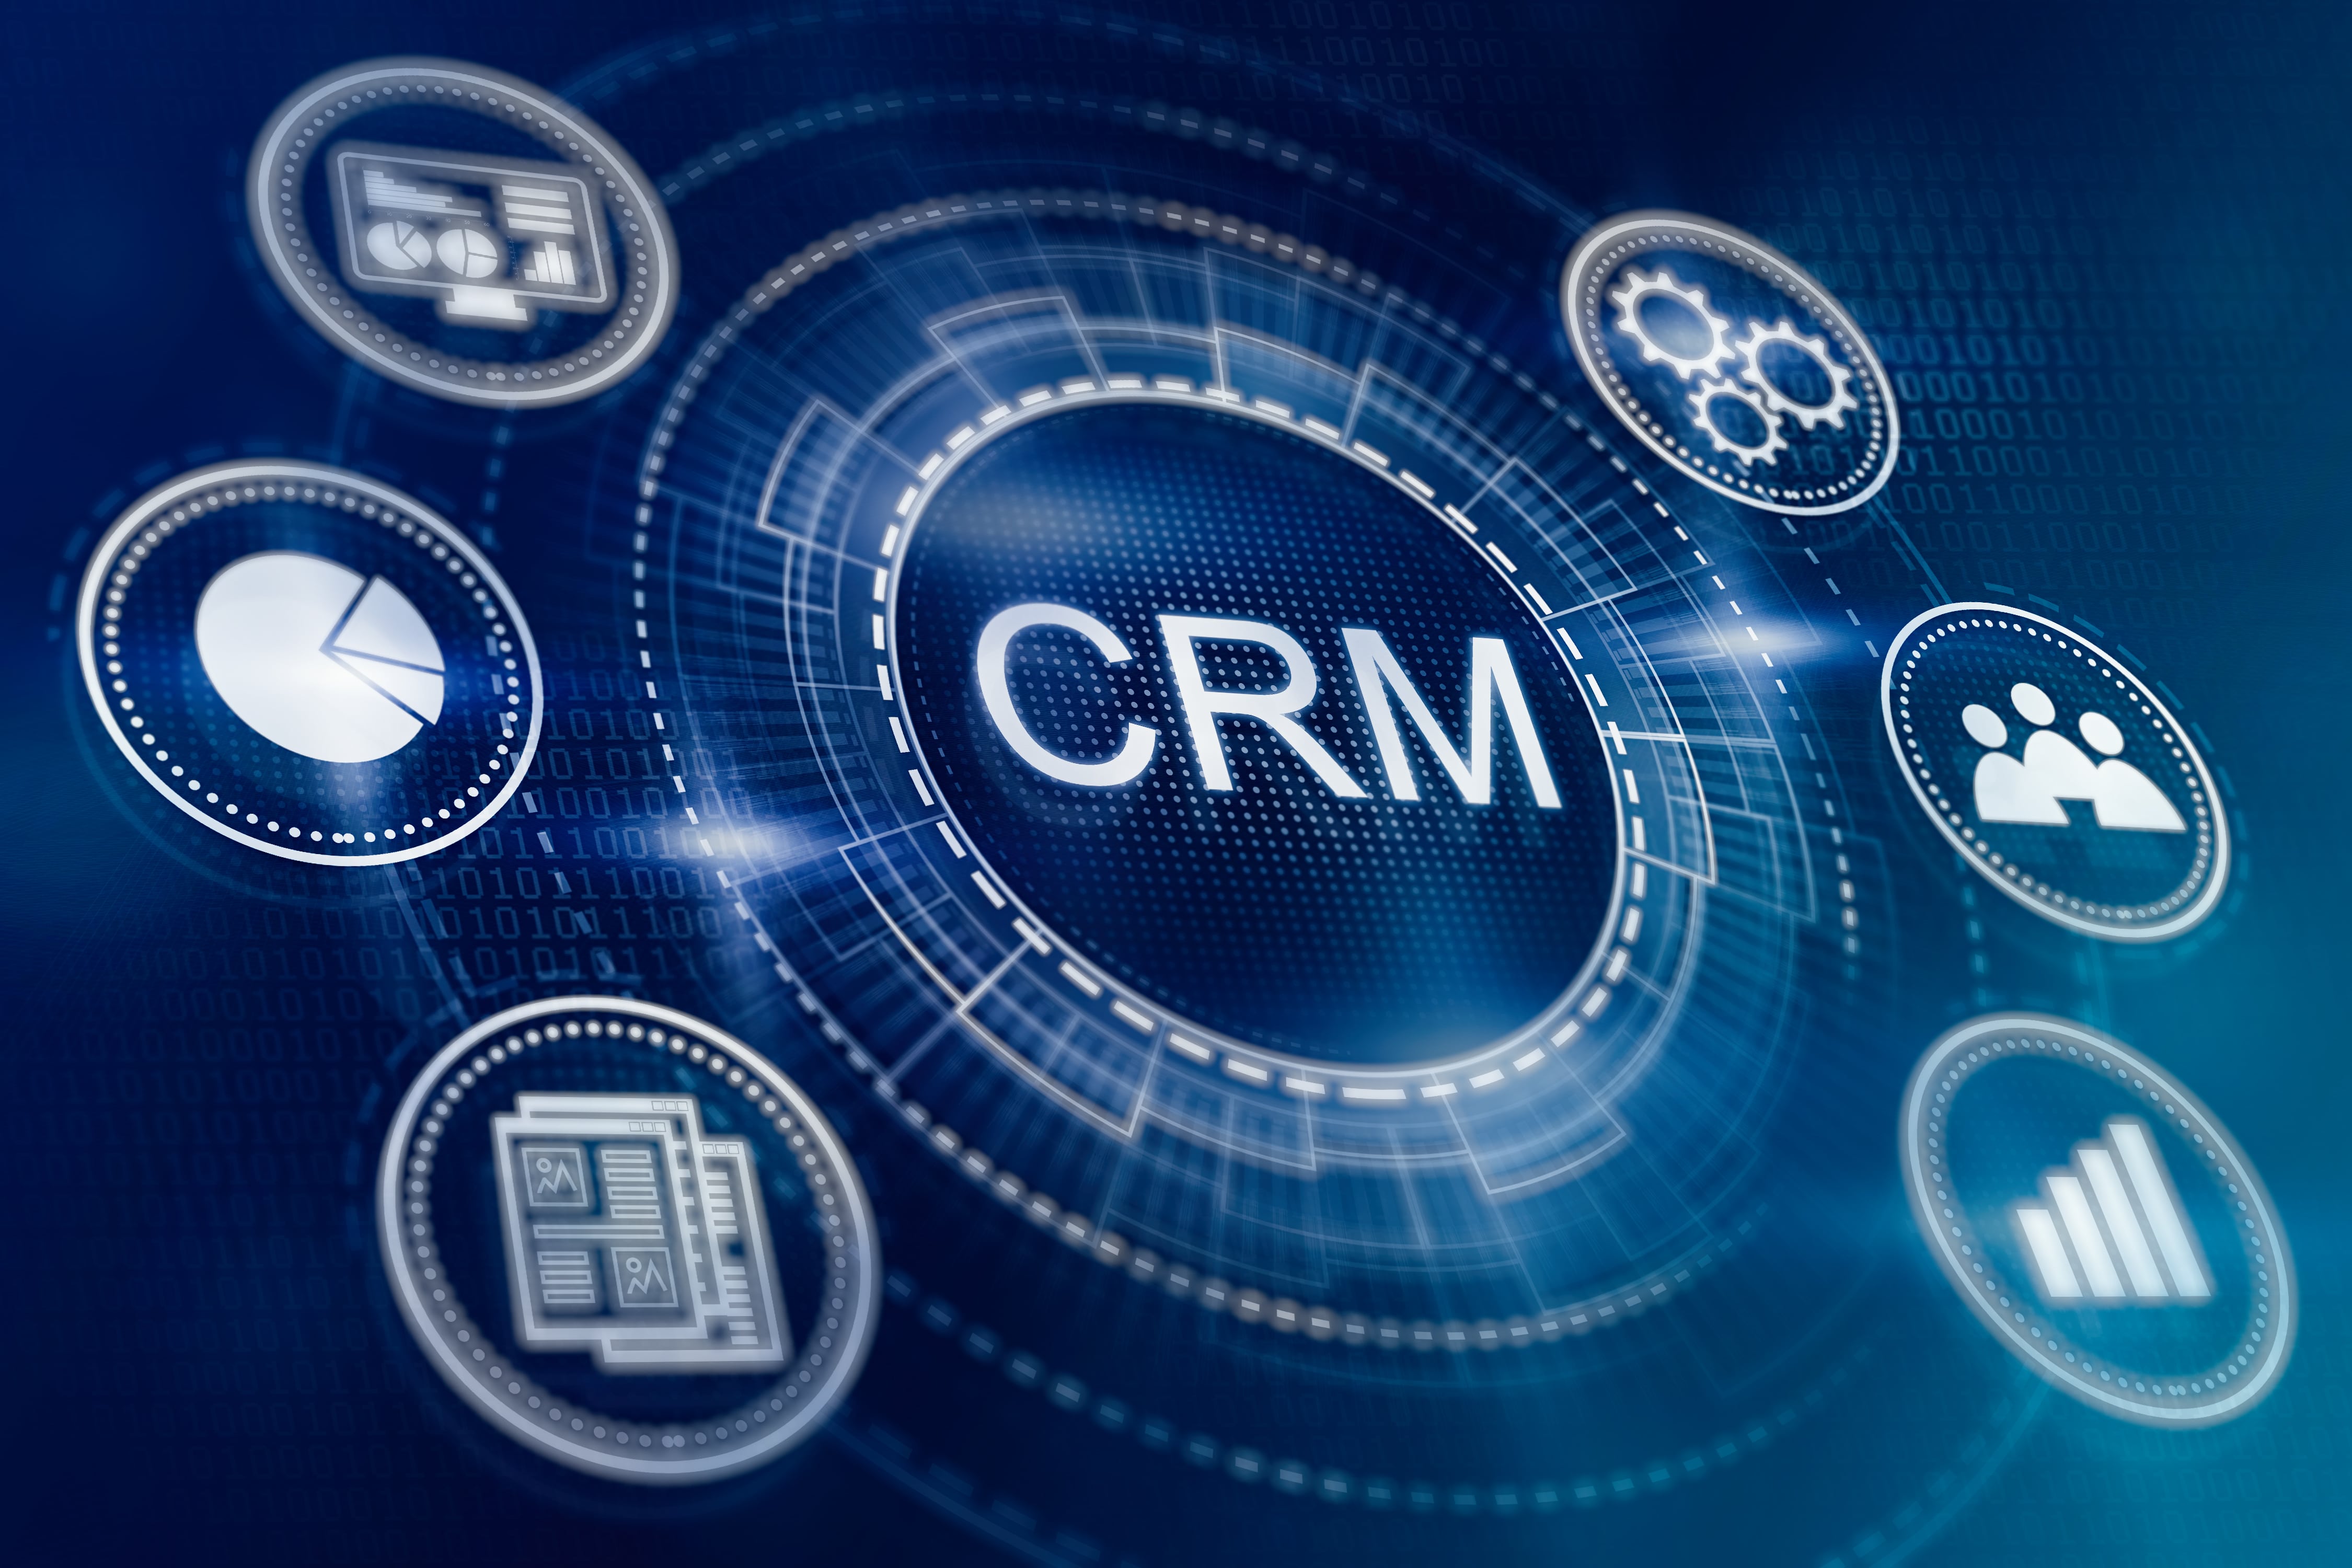 crm software services